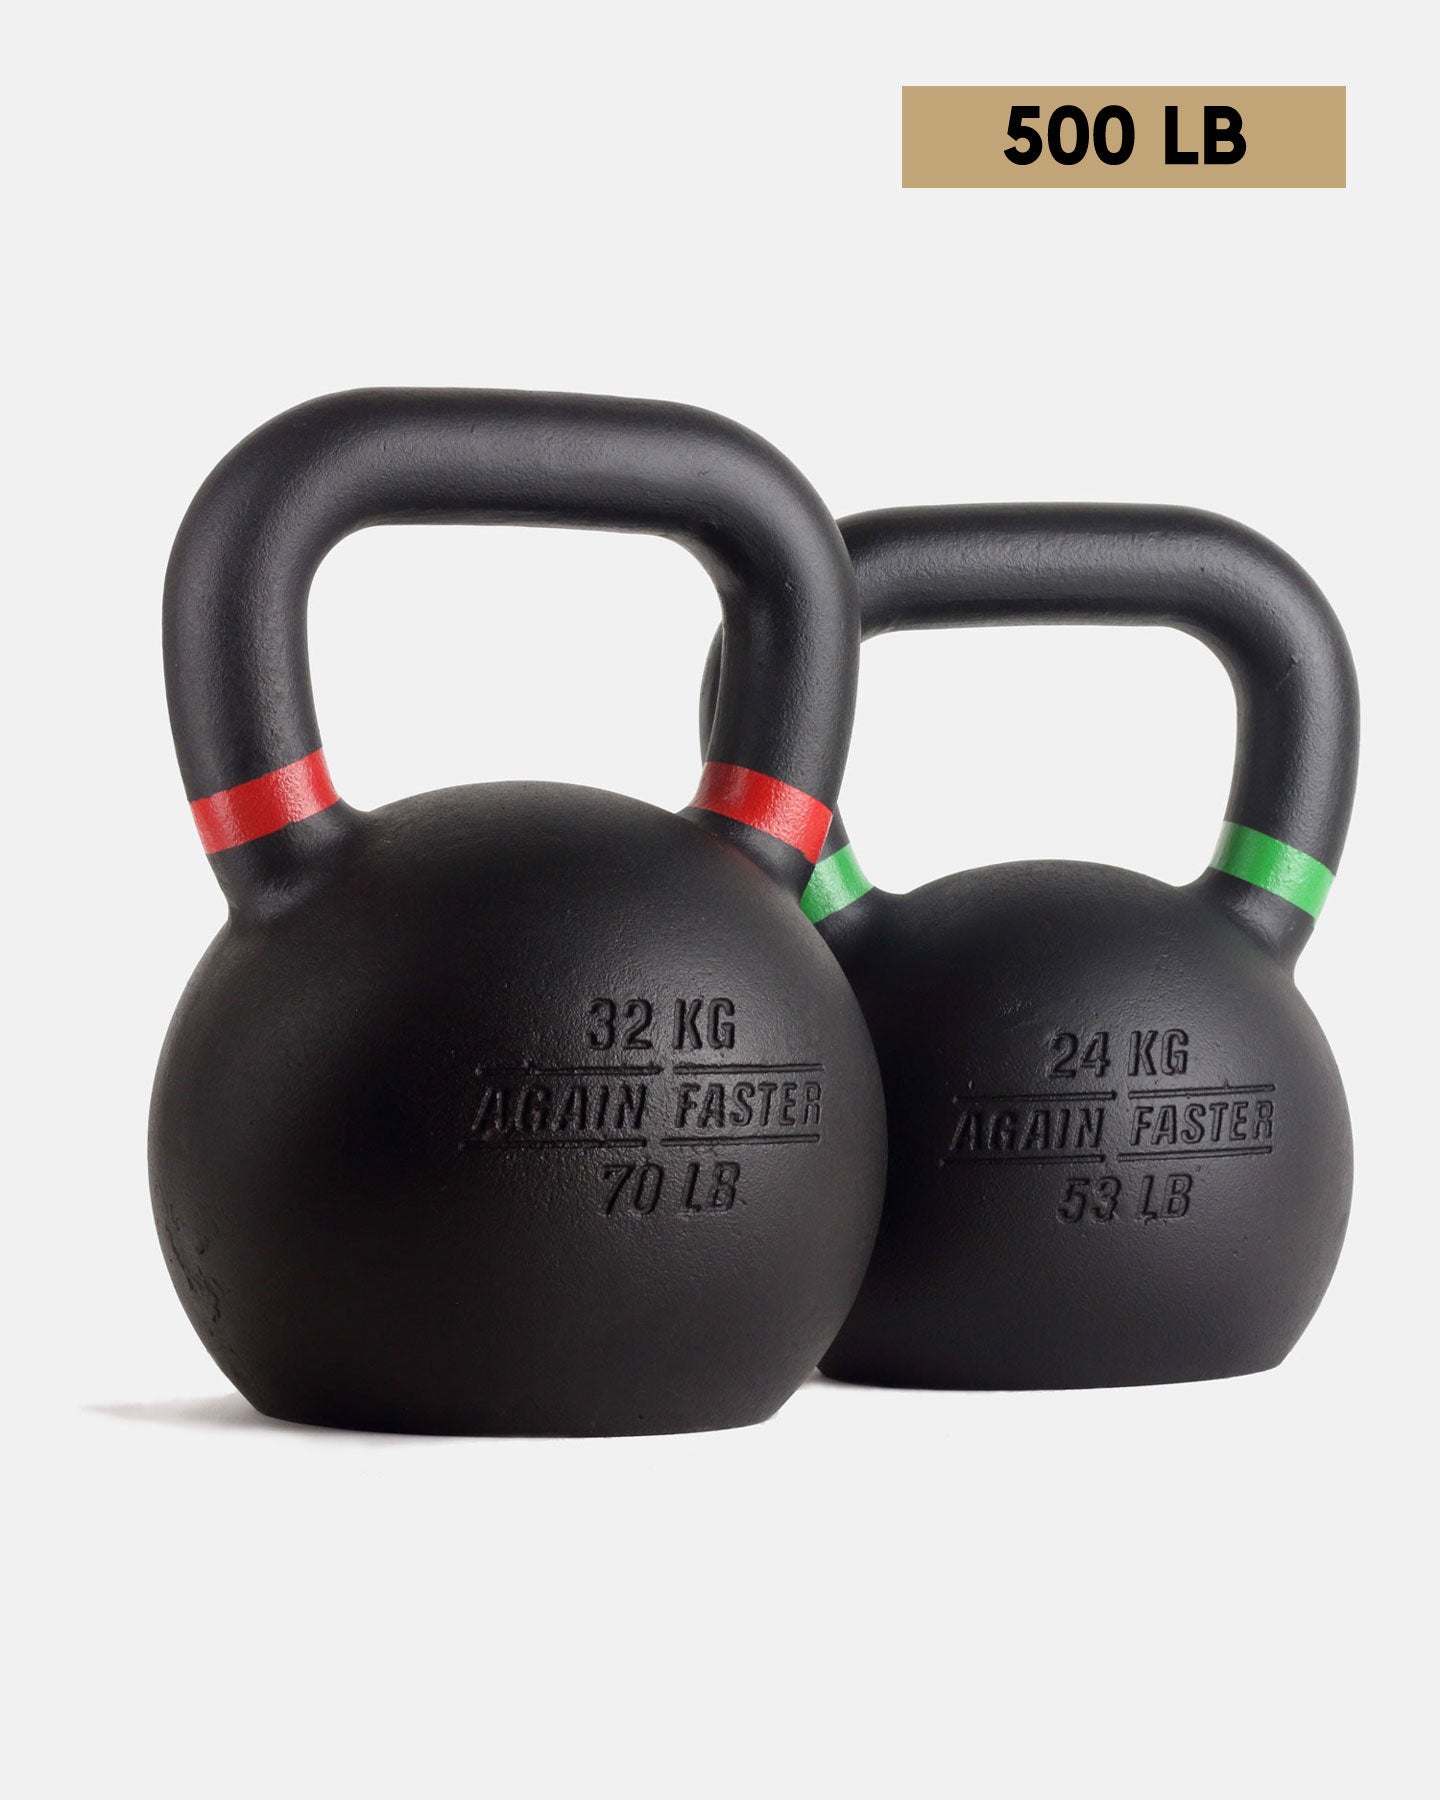 Competition Kettlebell 20kg – All Out Fitnessph